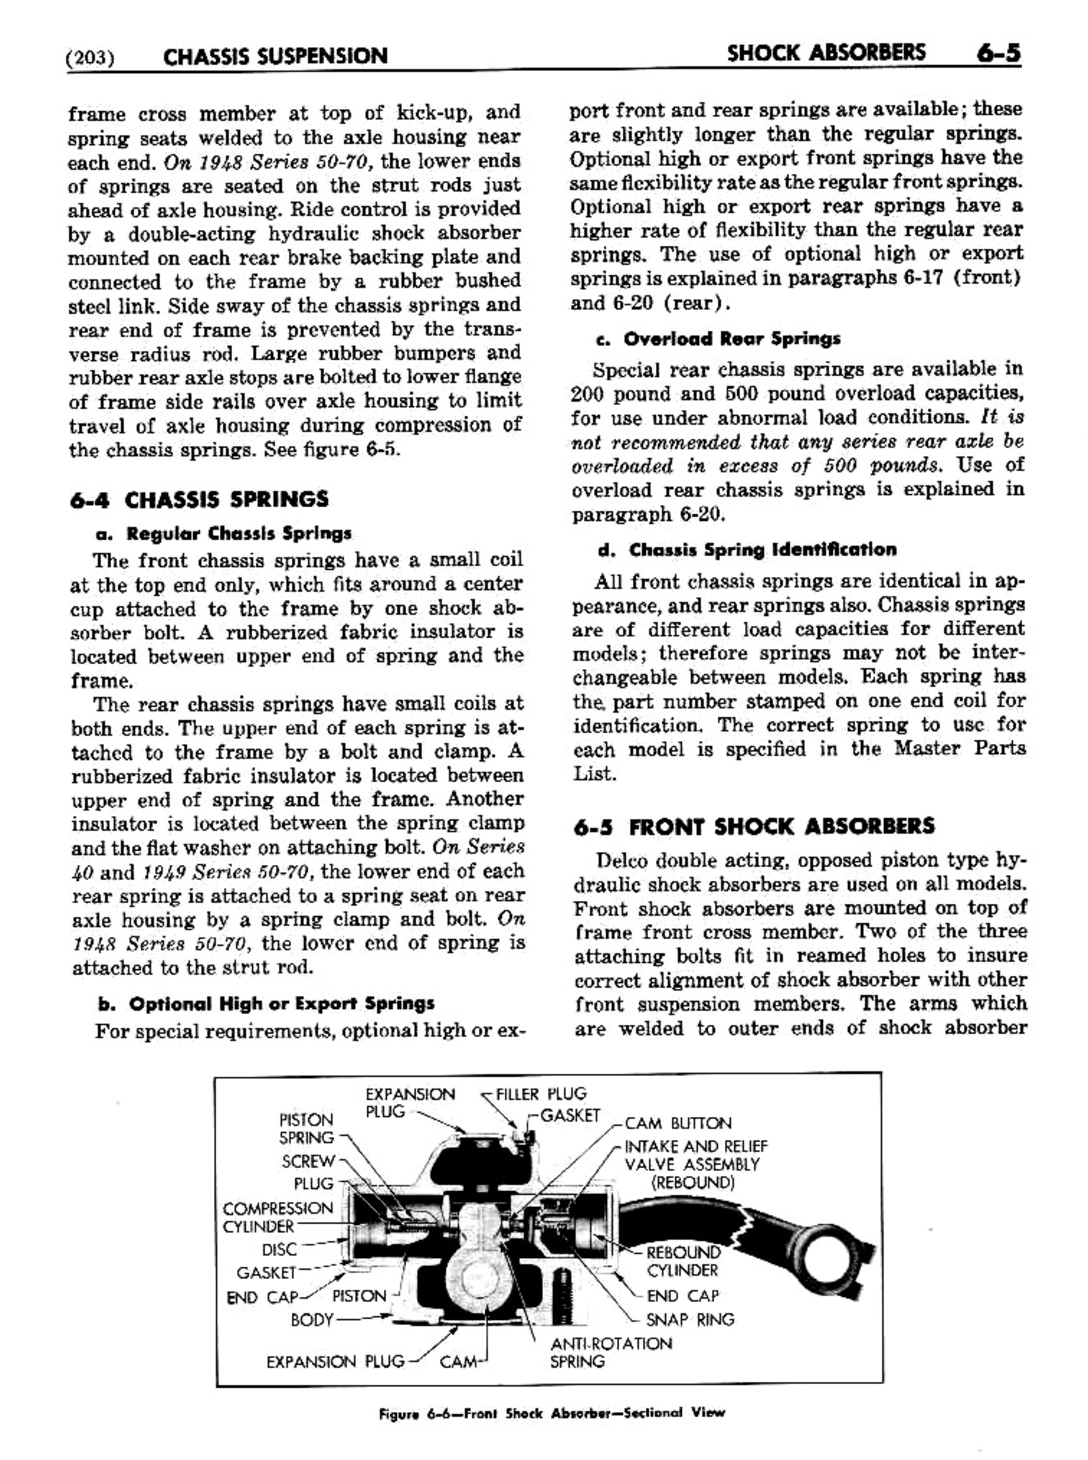 n_07 1948 Buick Shop Manual - Chassis Suspension-005-005.jpg